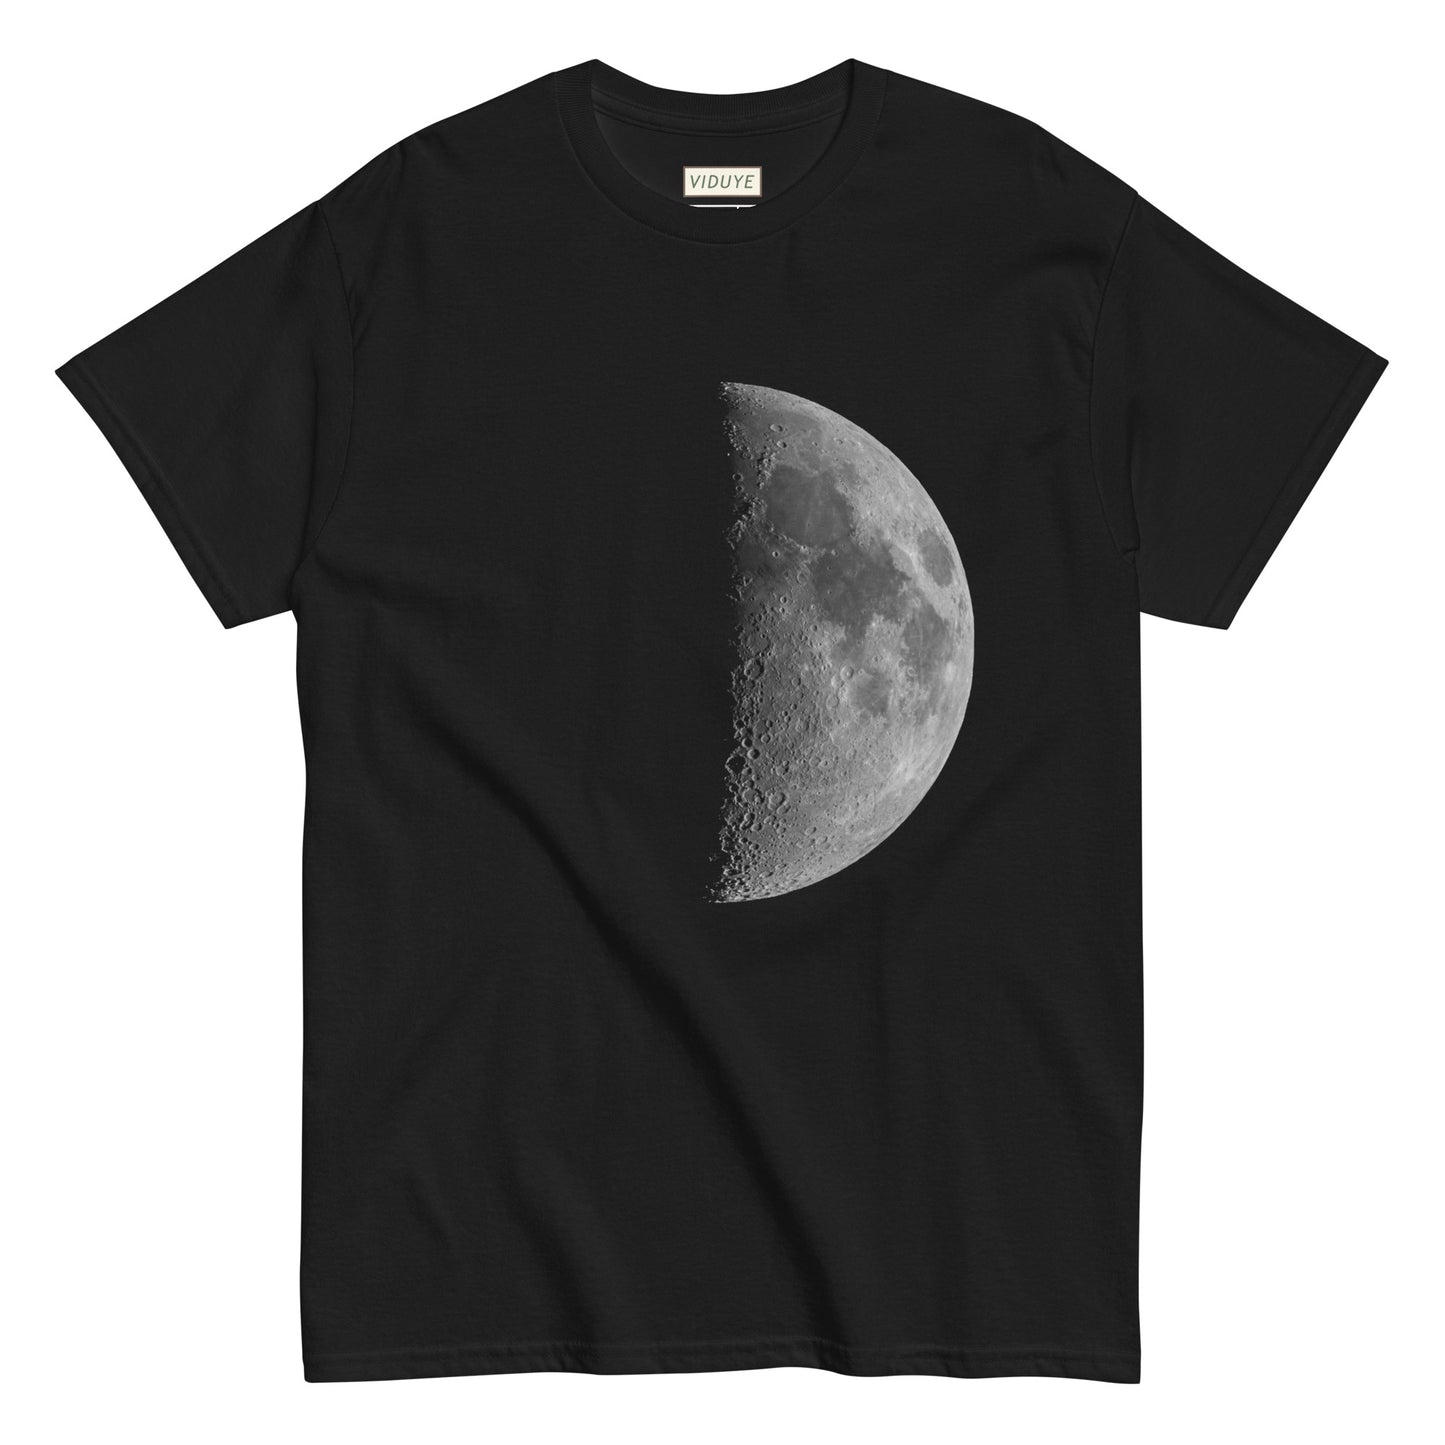 To the Moon - Unisex T-Shirt